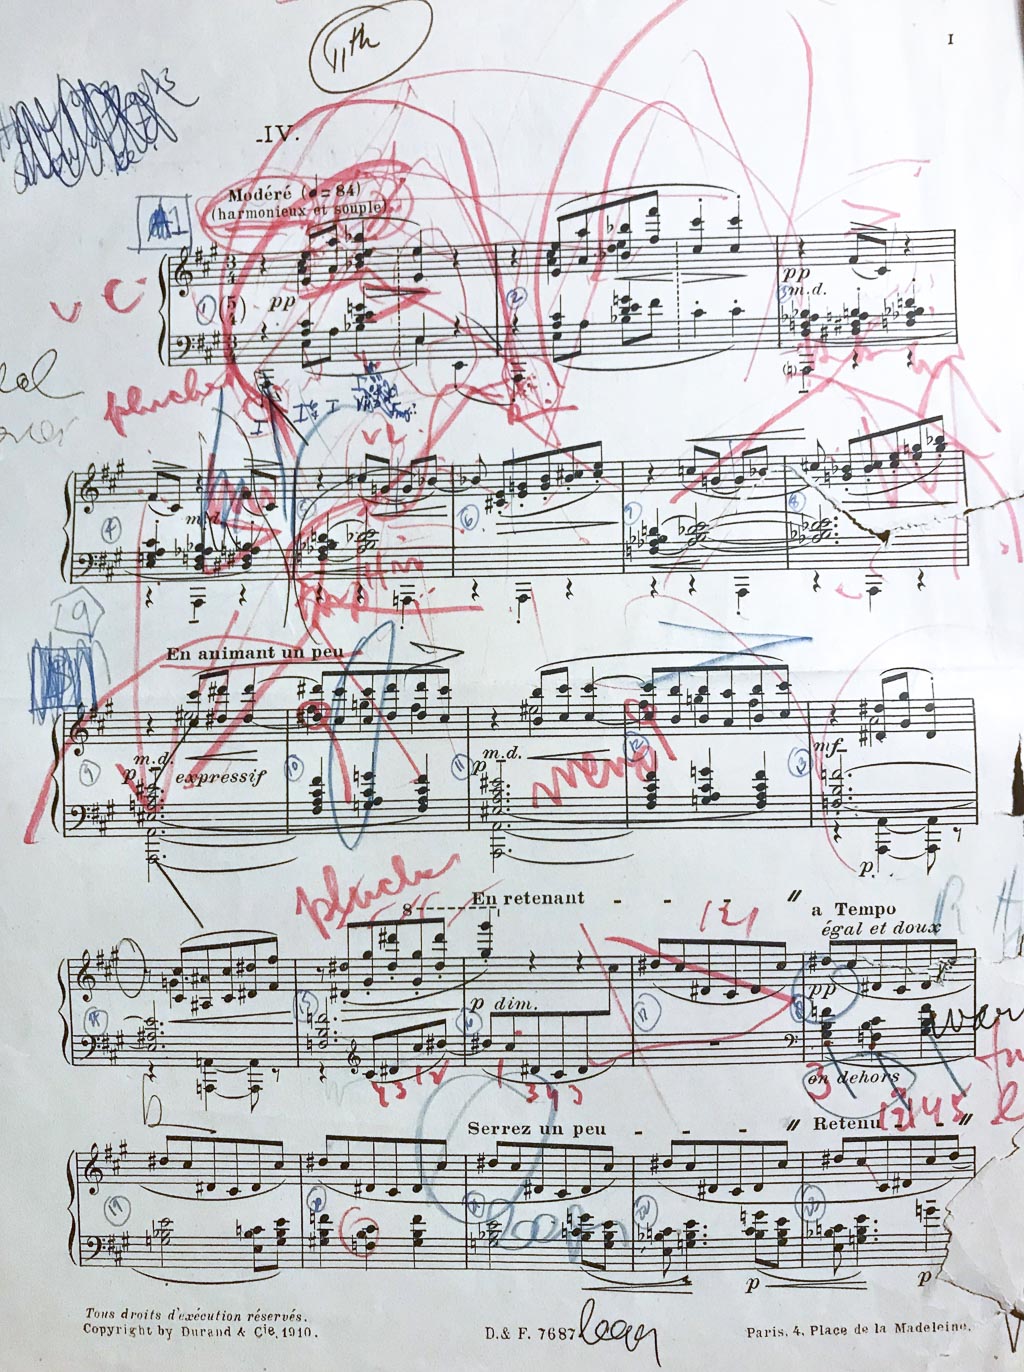 A page of music manuscript (Debussy prelude) with instructional markings in various colors, by Harold Zabrack.